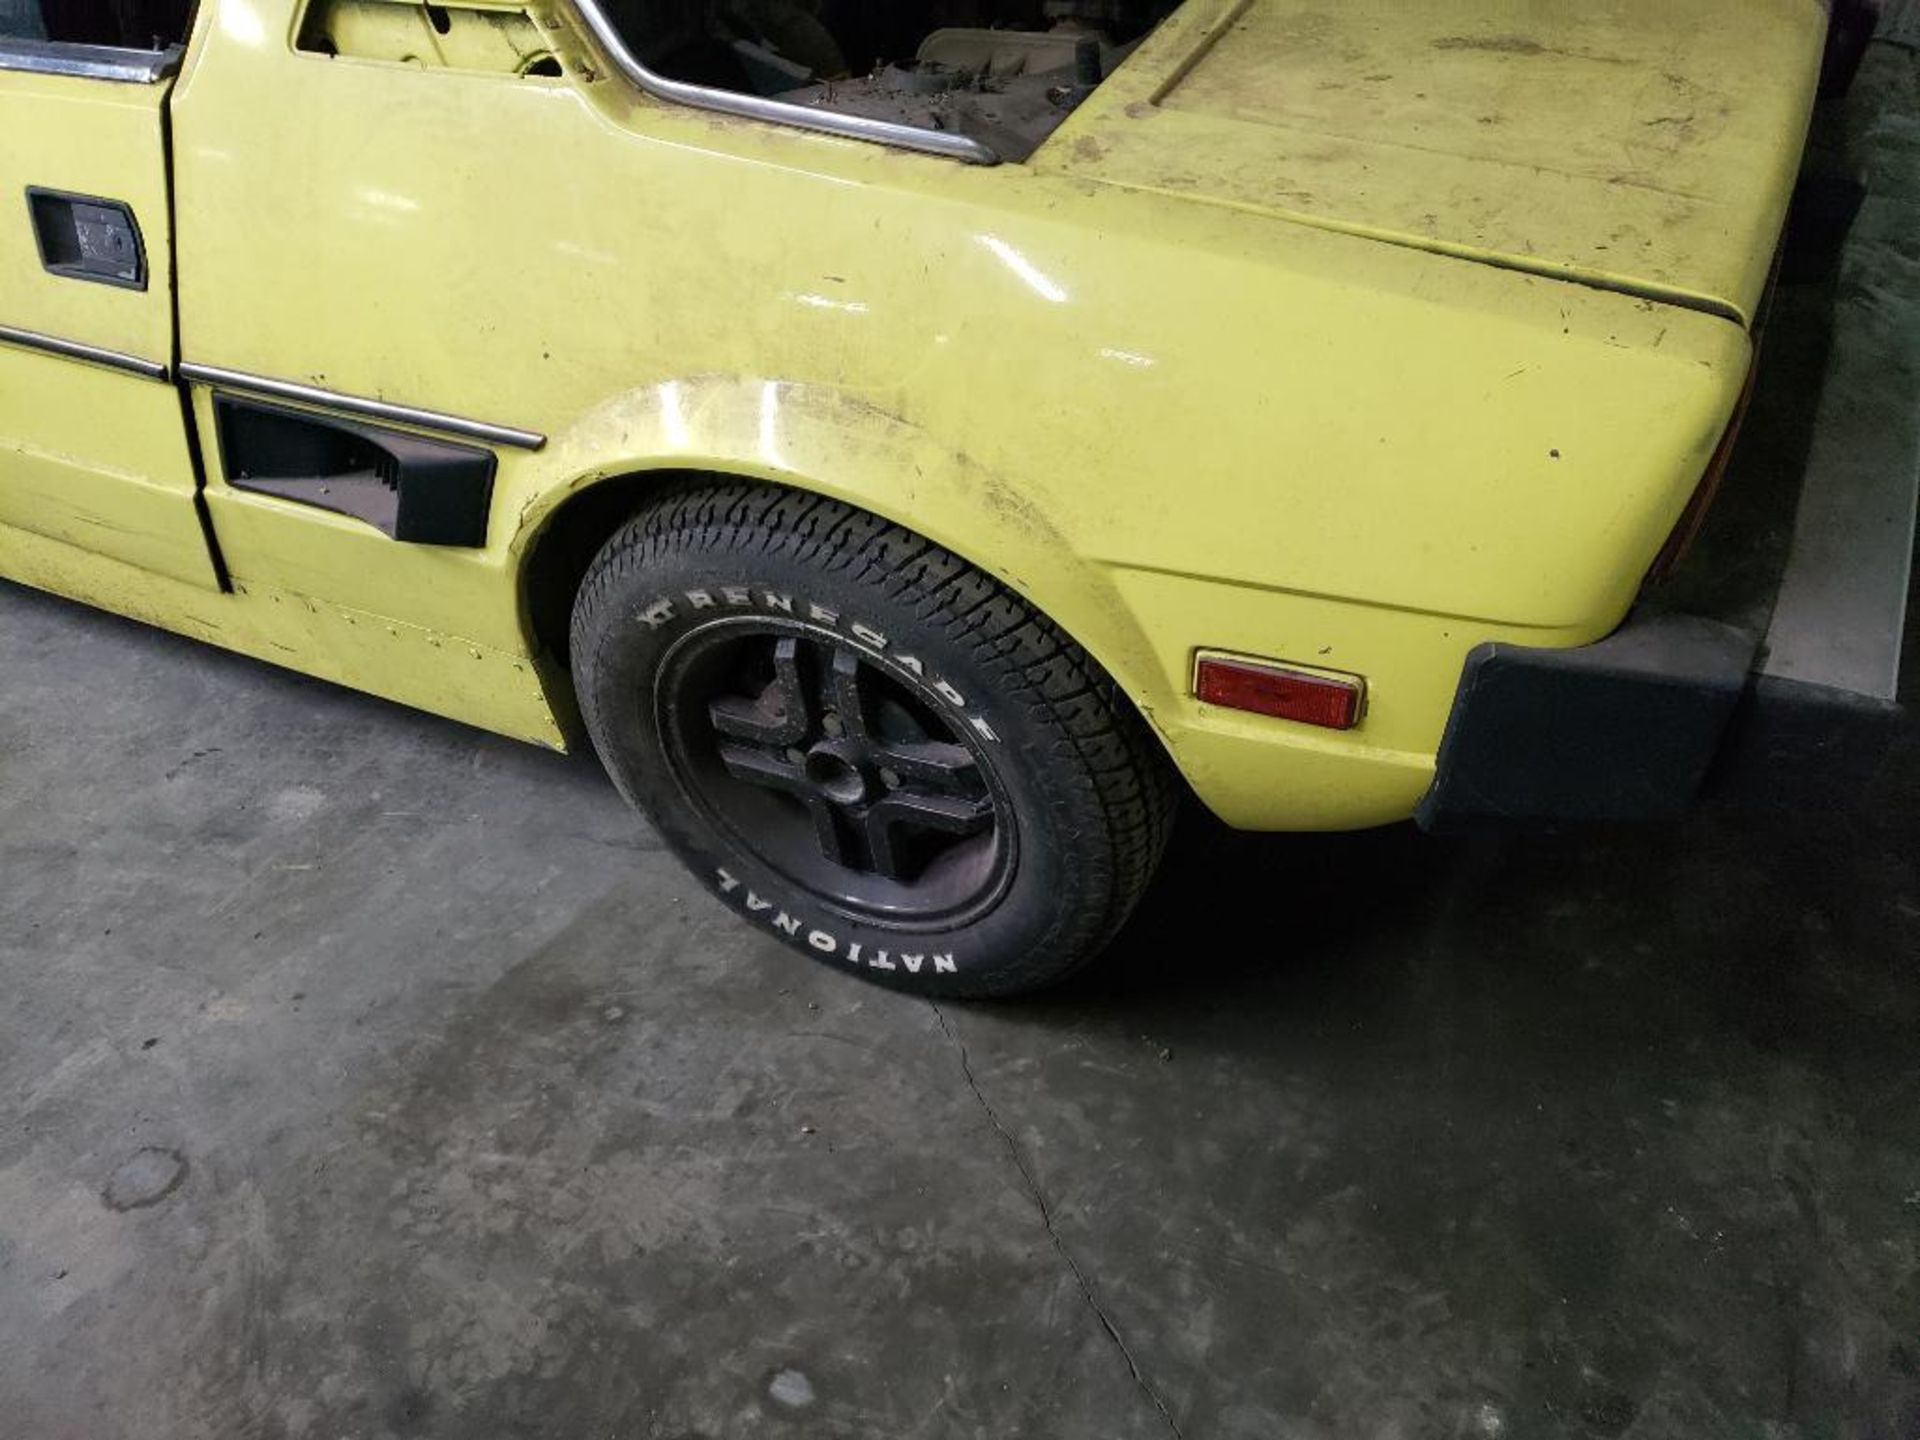 1981 Fiat Bertone. VIN number ZFABS00A6B8142844. Parts repairable. Vehicle IS titled. - Image 19 of 29